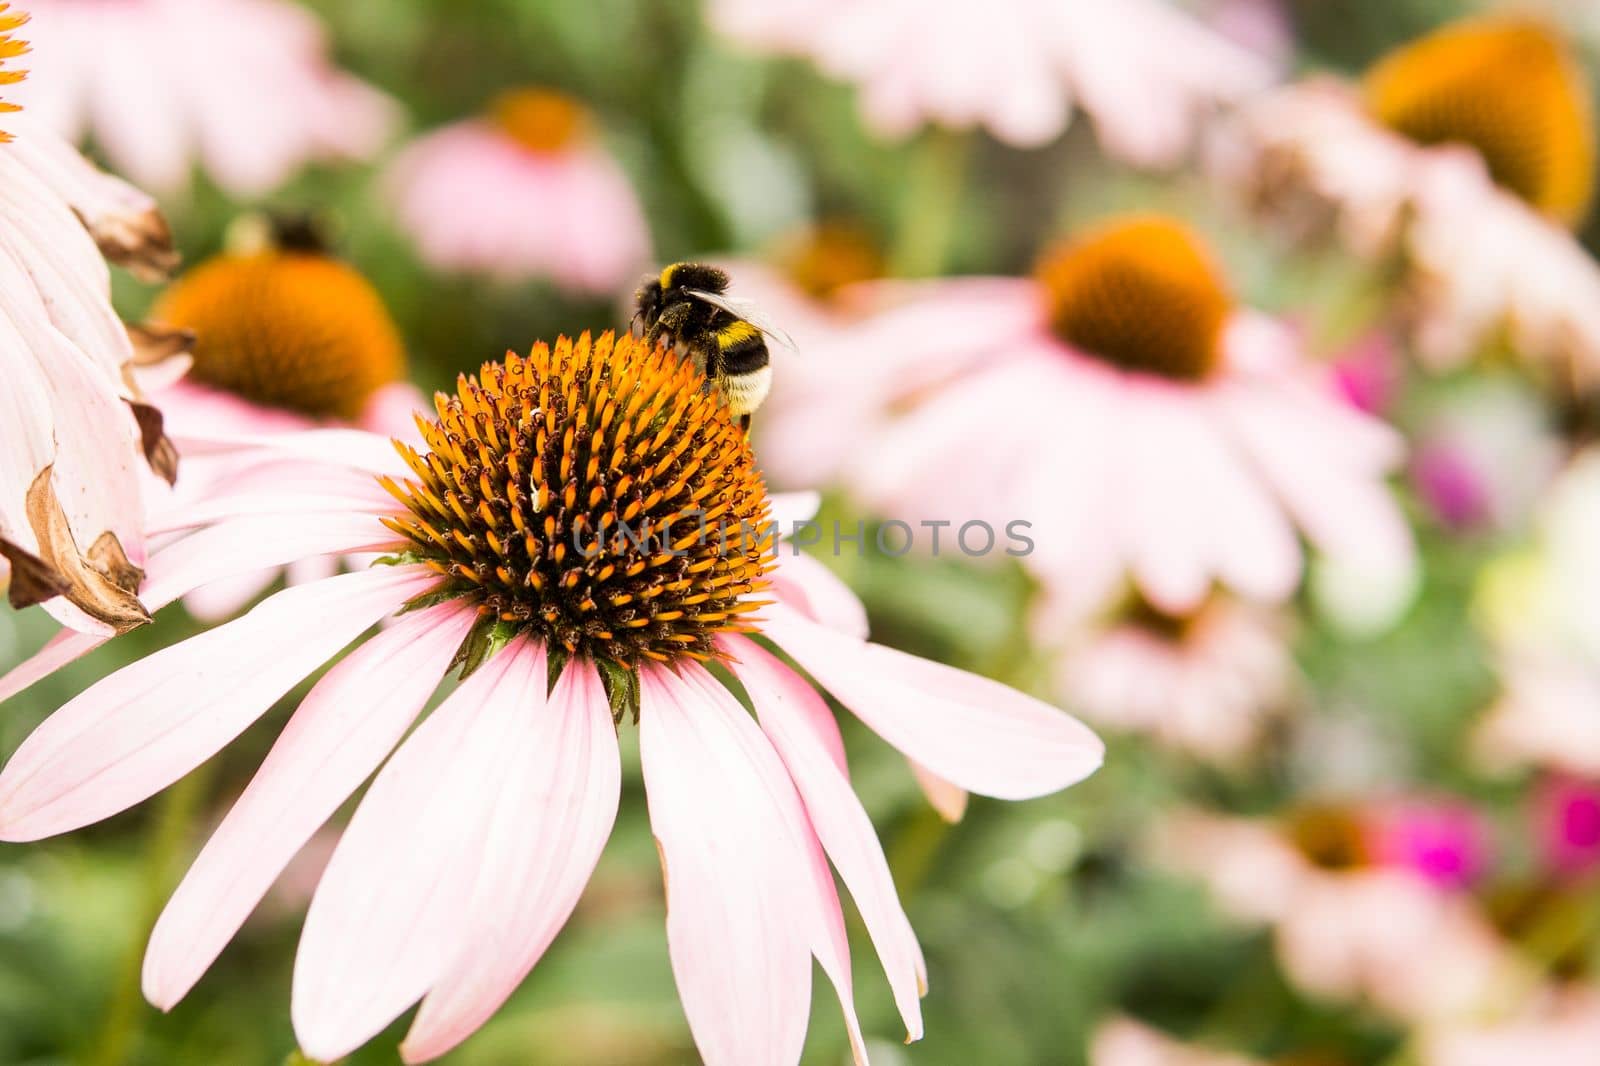 Beautiful daisies growing in the garden. Gardening concept, close-up. The flower is pollinated by a bumblebee